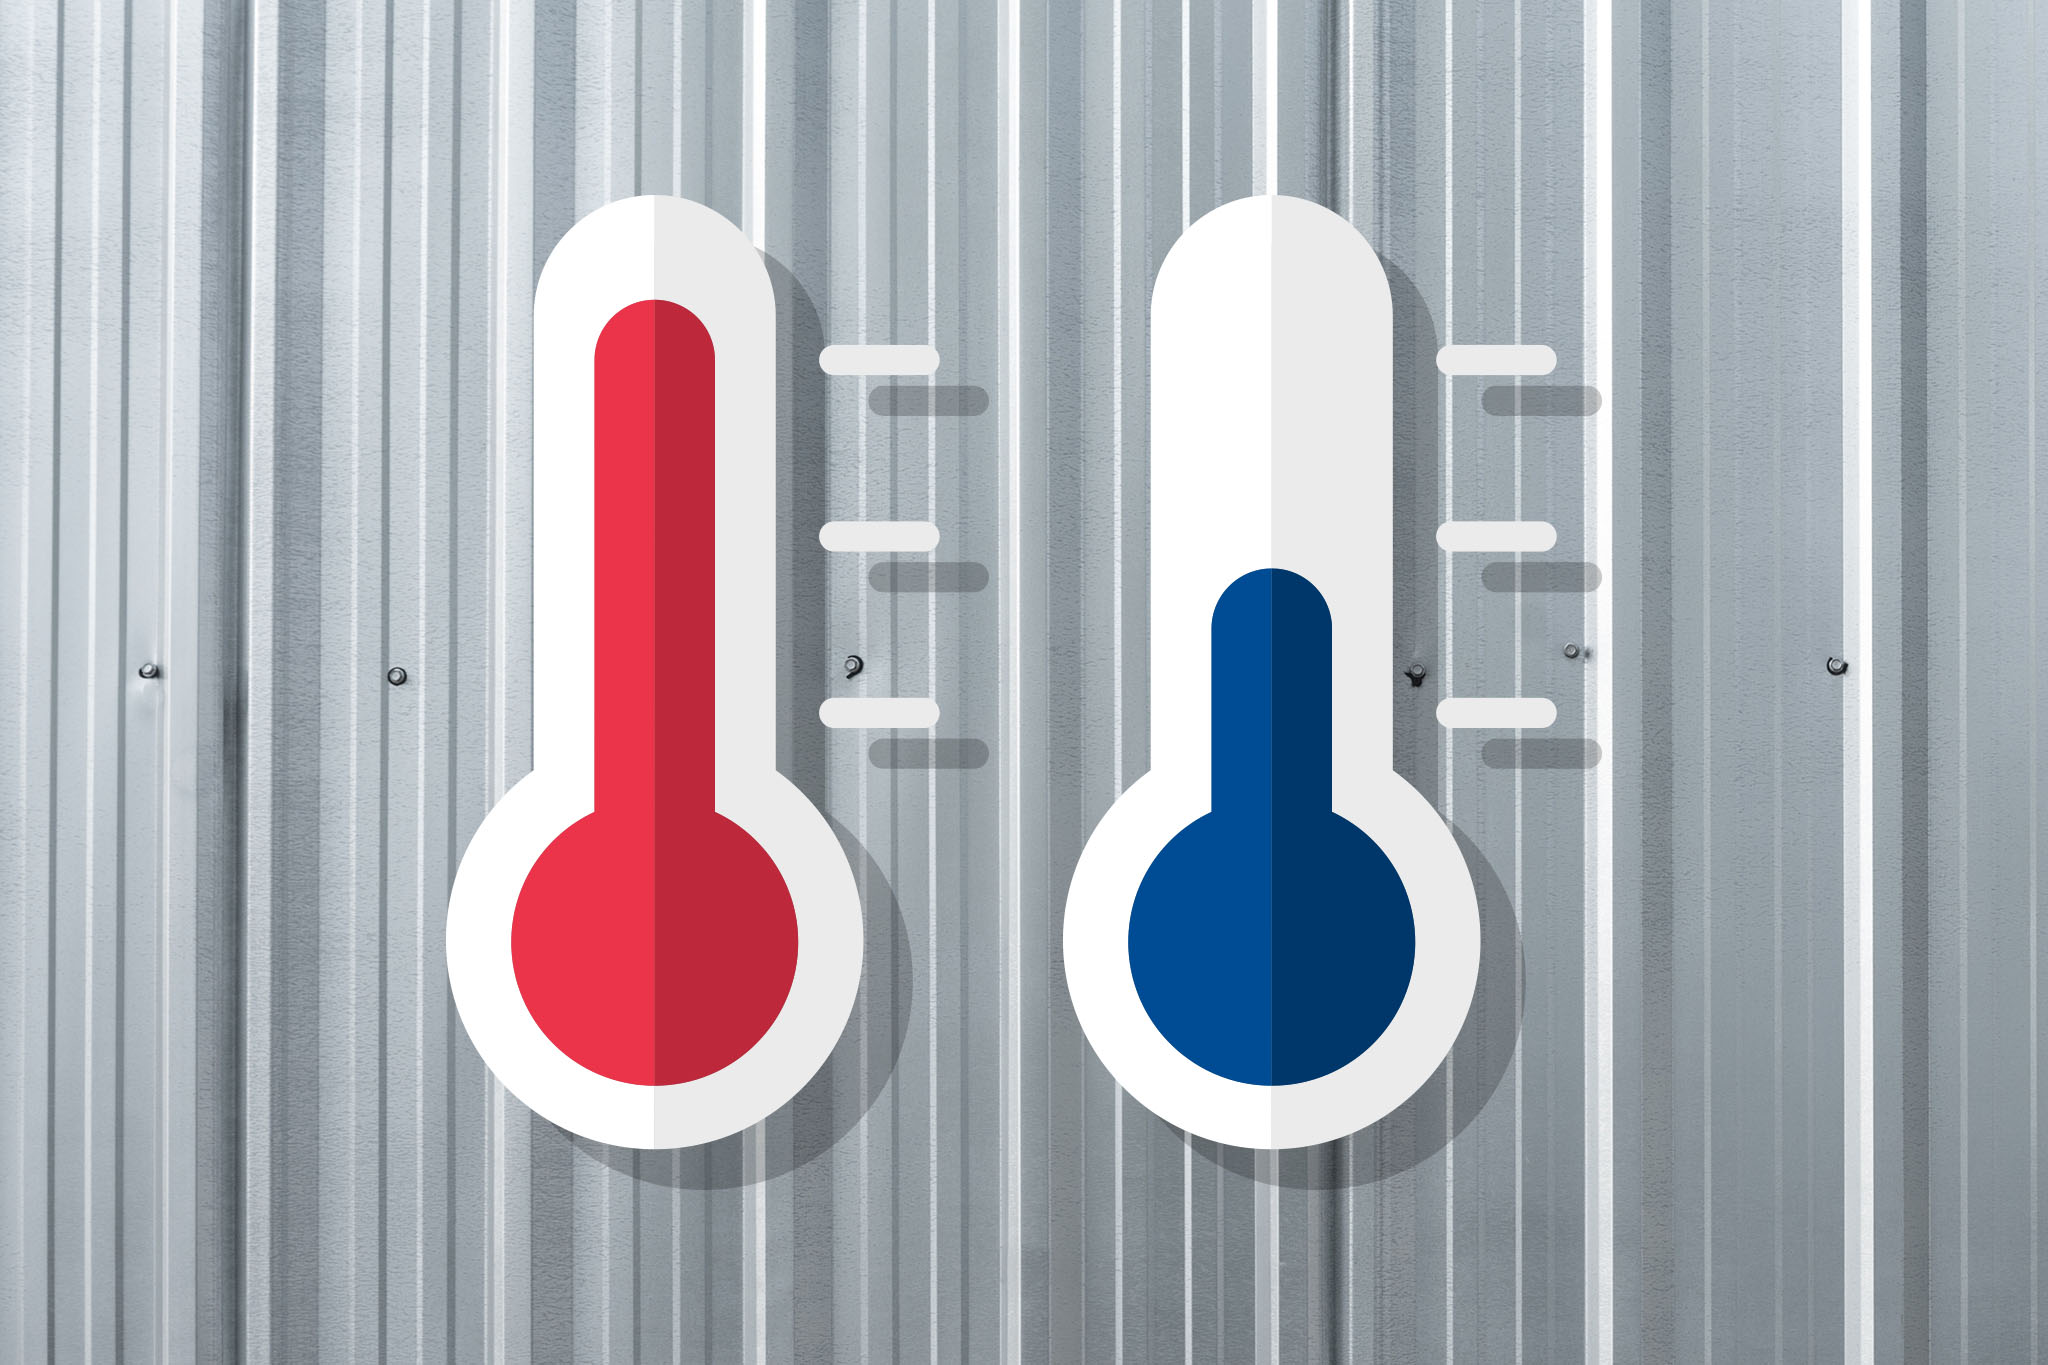 Thermometer Icons on Galvanized Sheet